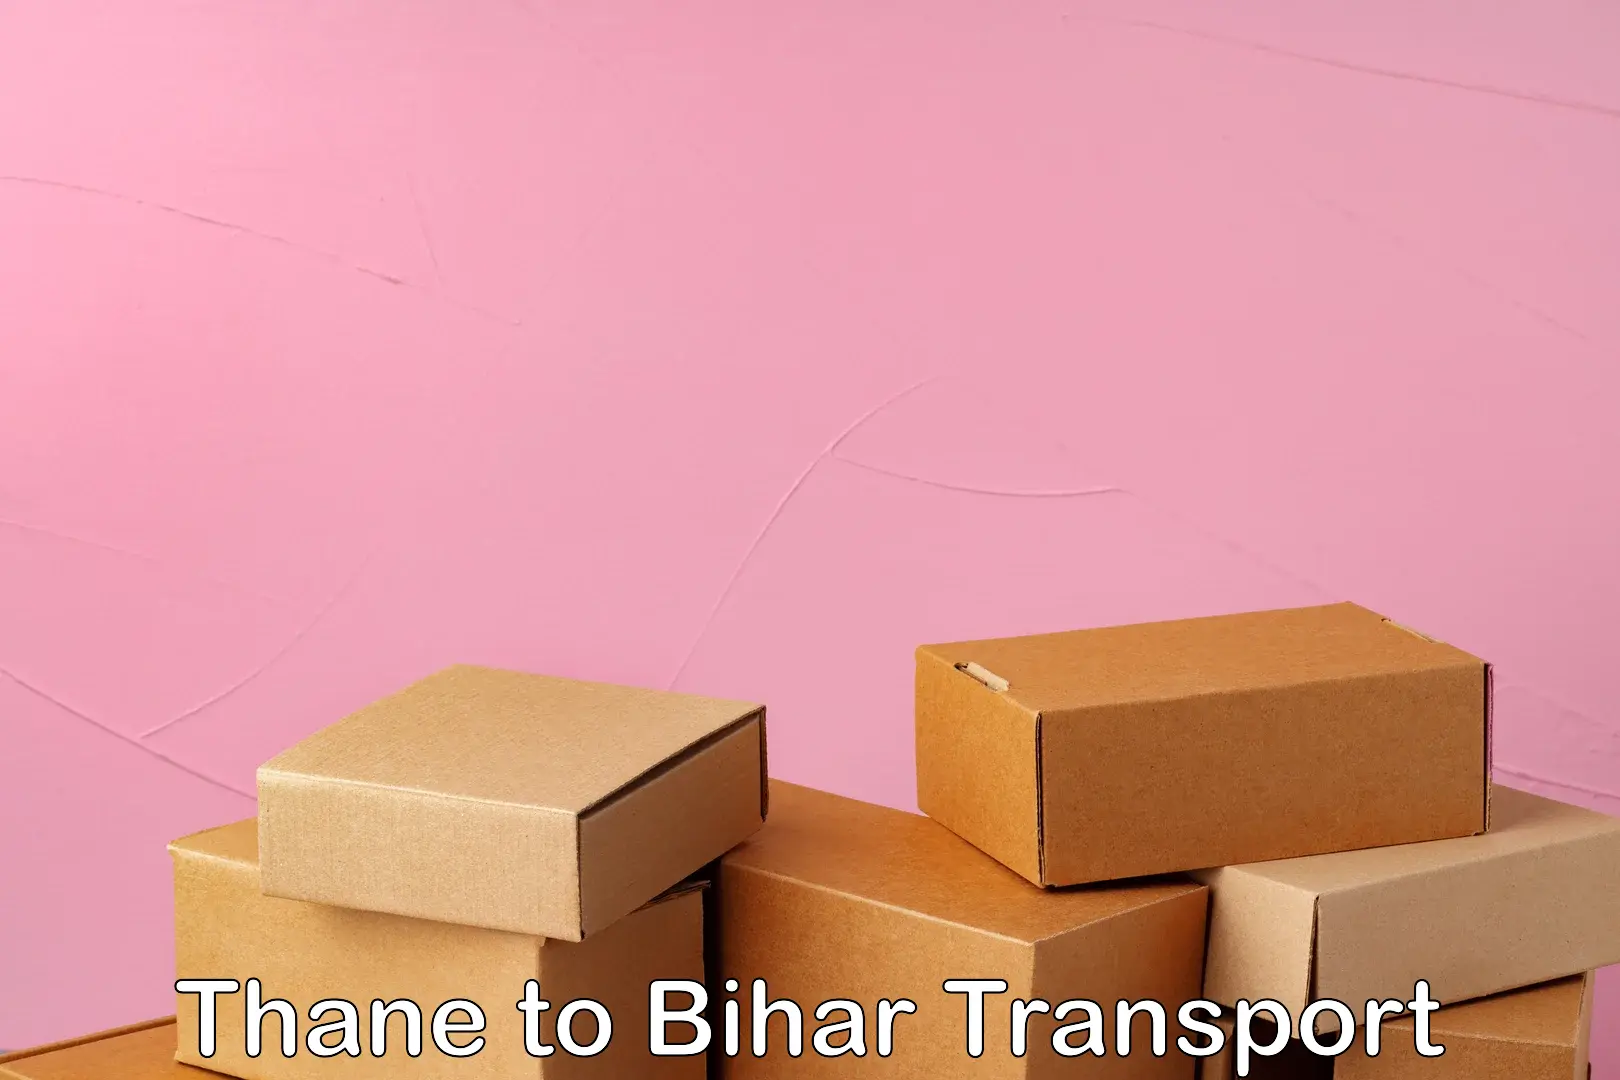 Nearby transport service Thane to Bihar